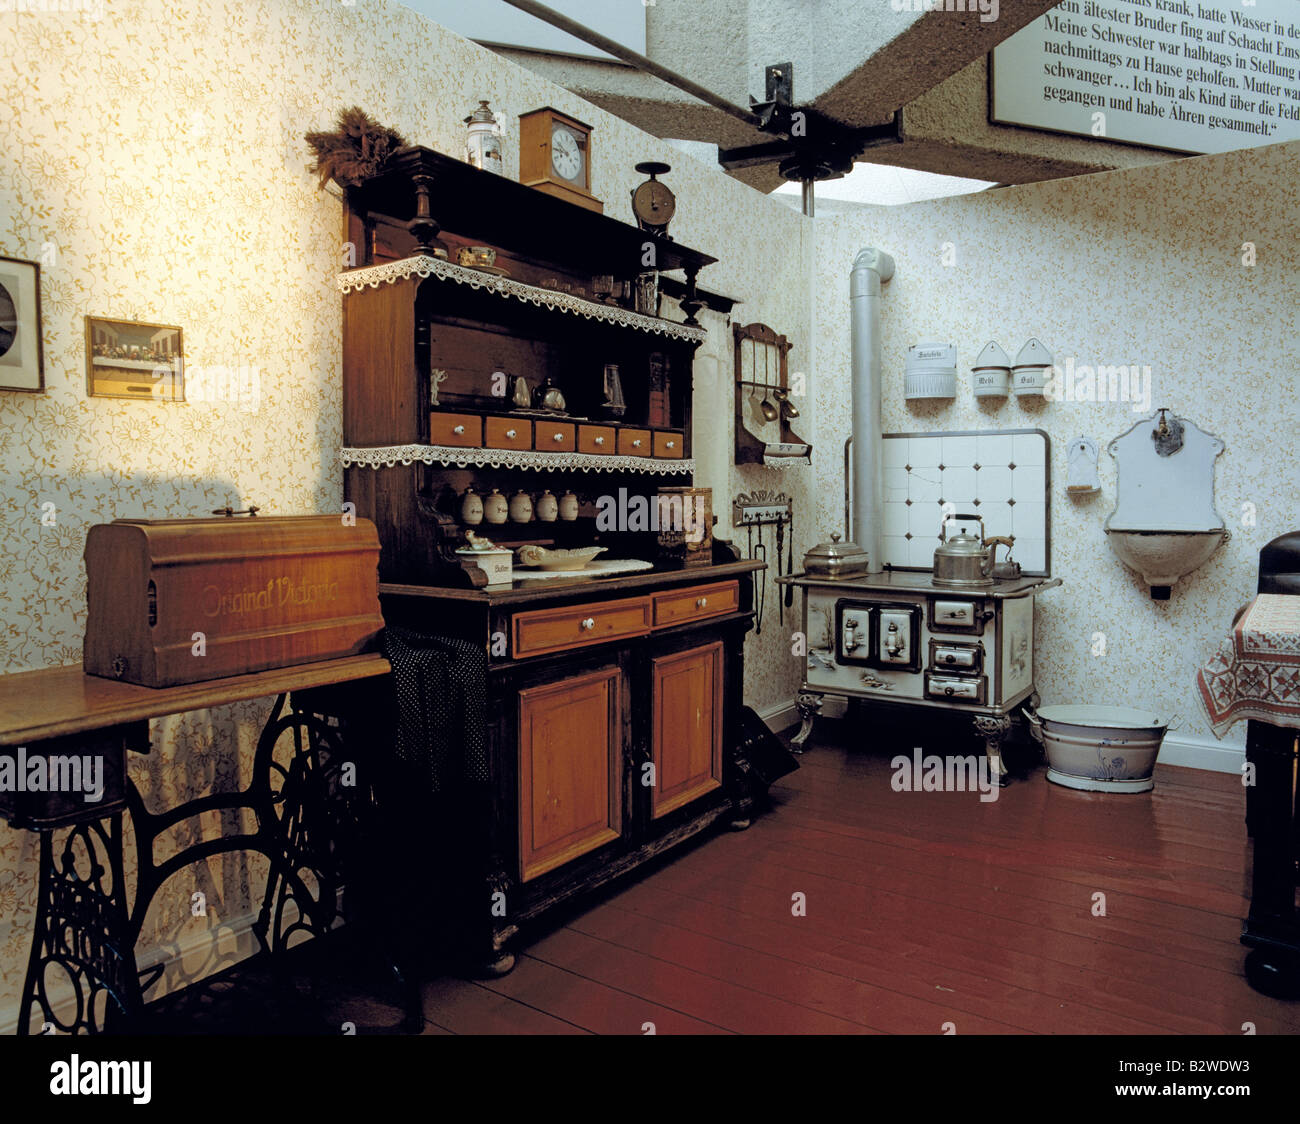 D-Essen, Ruhr area, North Rhine-Westphalia, Cultural Capital 2010, Ruhrland Museum, interior view, exhibition, historic kitchen, kitchen appliance, sewing machine, cabinet, cupboard, kitchen cabinet, kitchen cupboard, oven, stove, cooker, masonry heater, Stock Photo